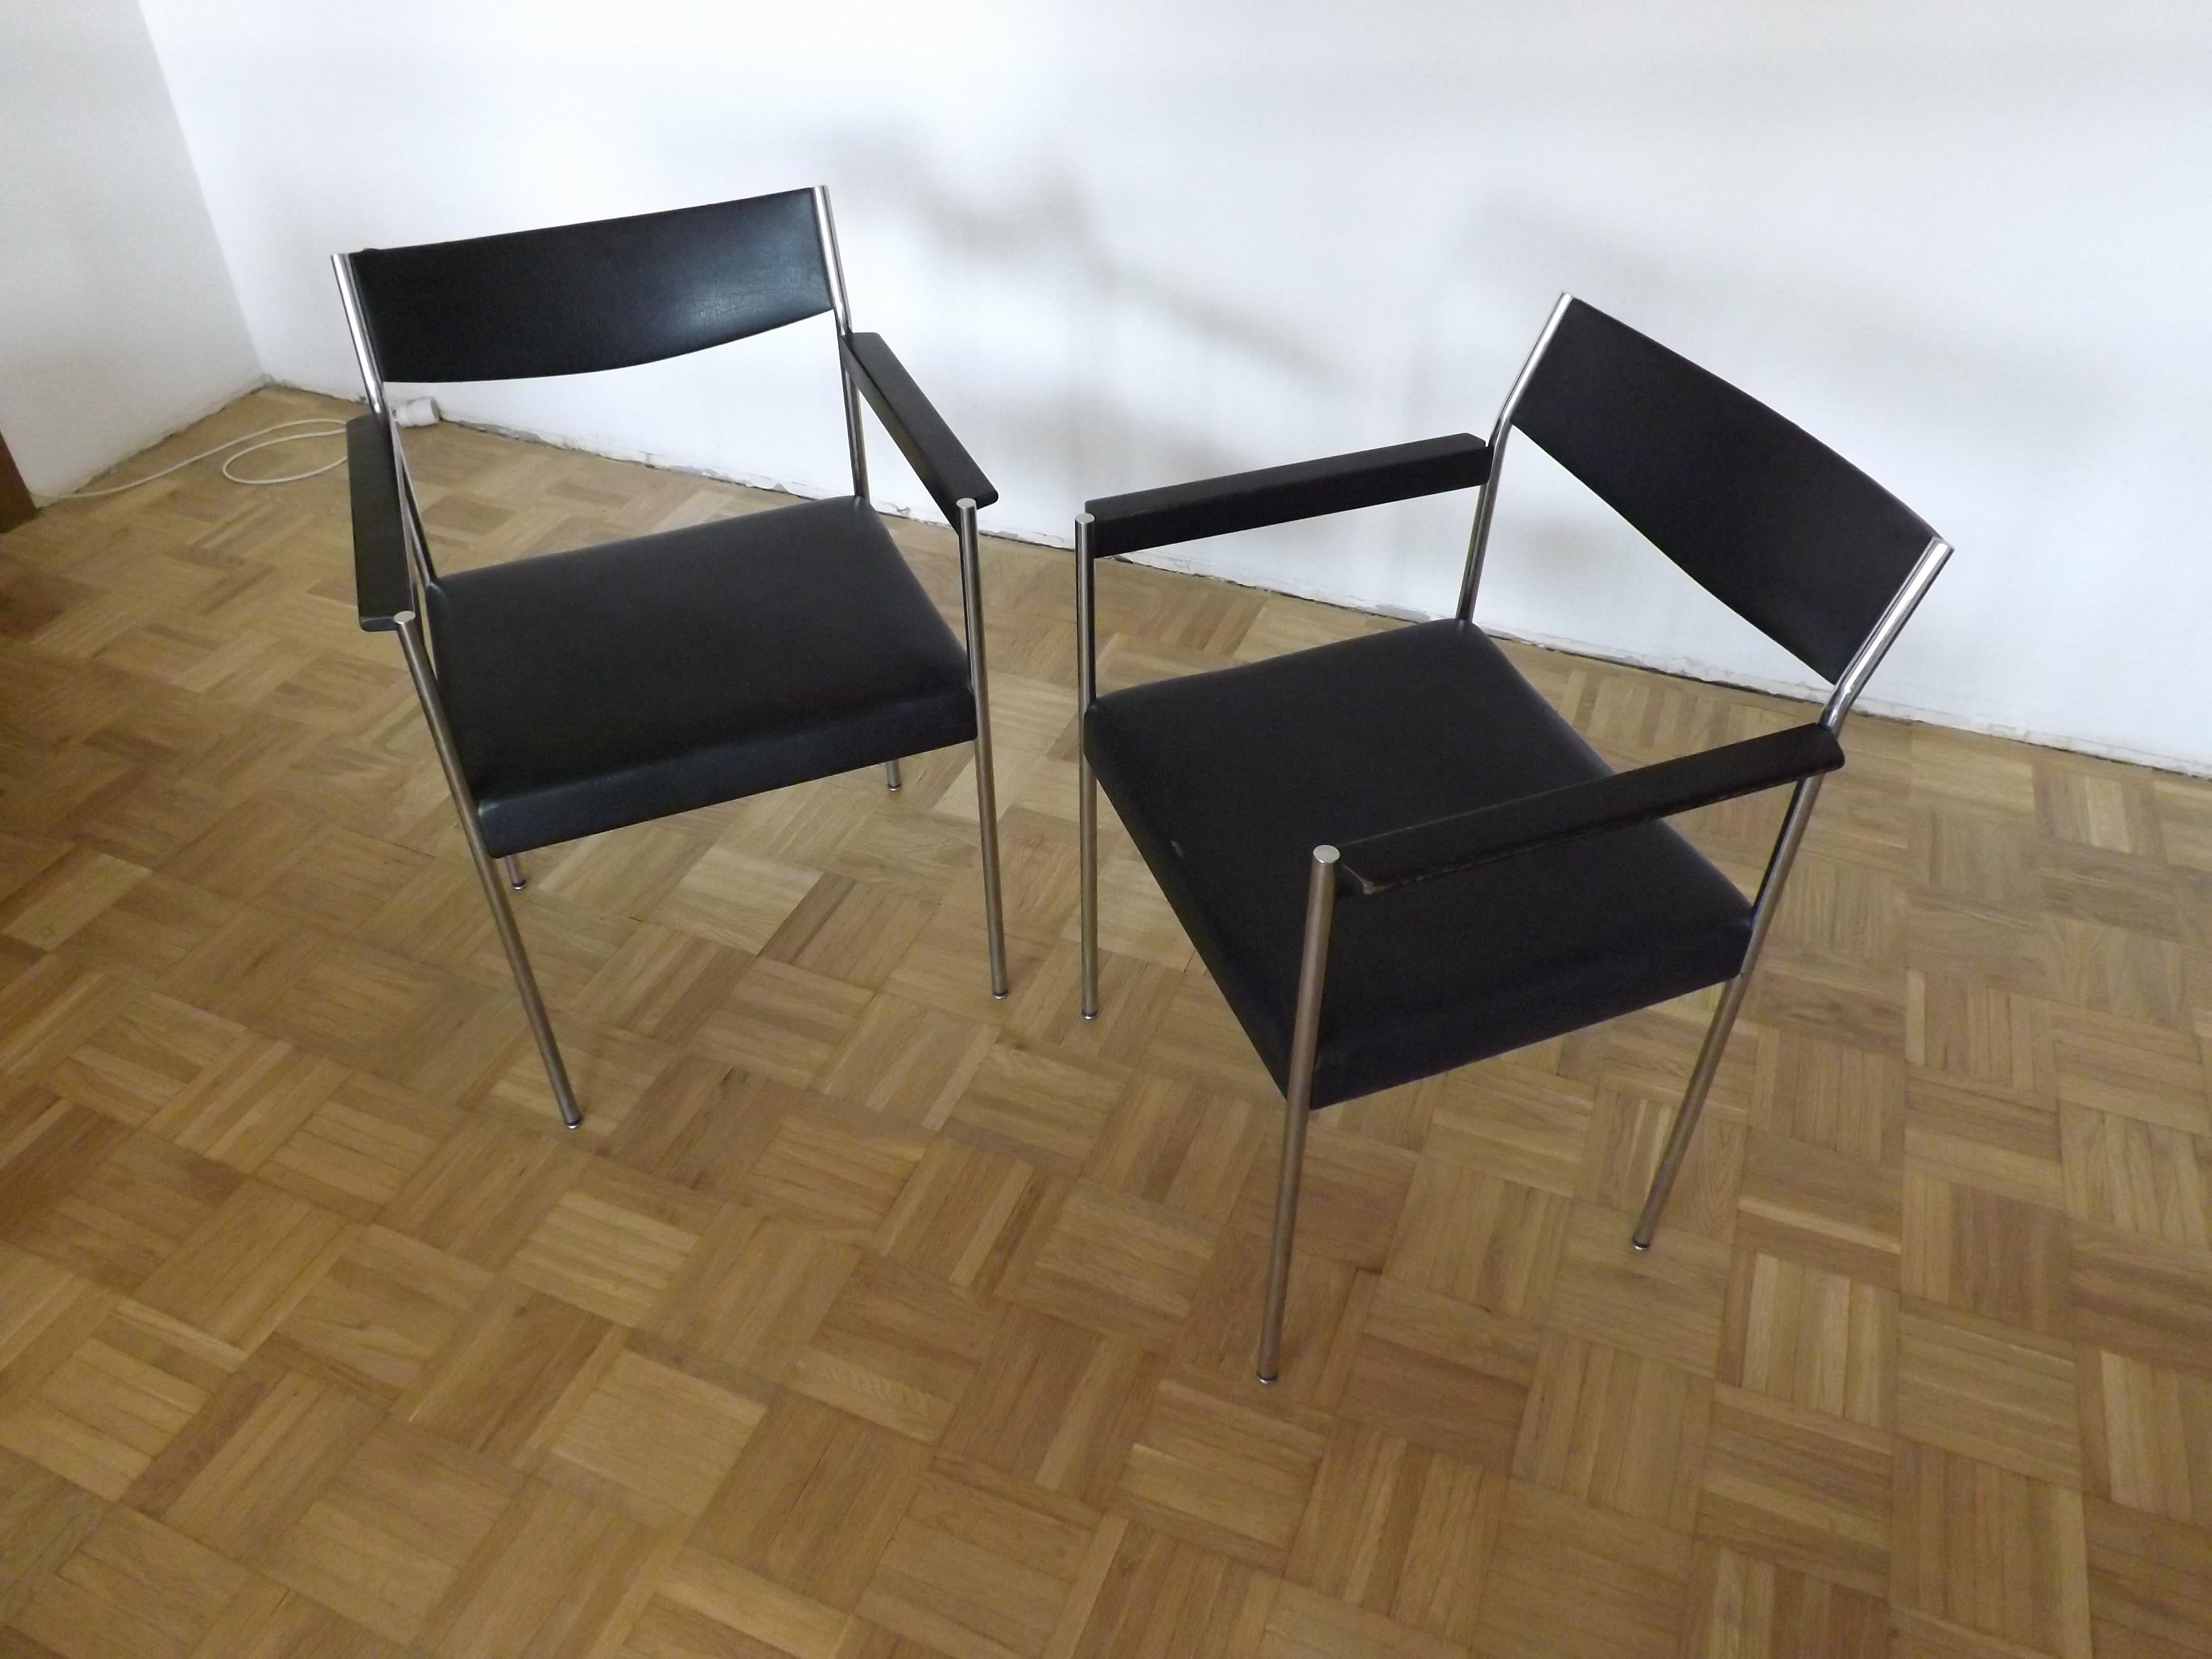 Edlef Bendixen Armchairs for Kusch and Co. 1970s For Sale 2